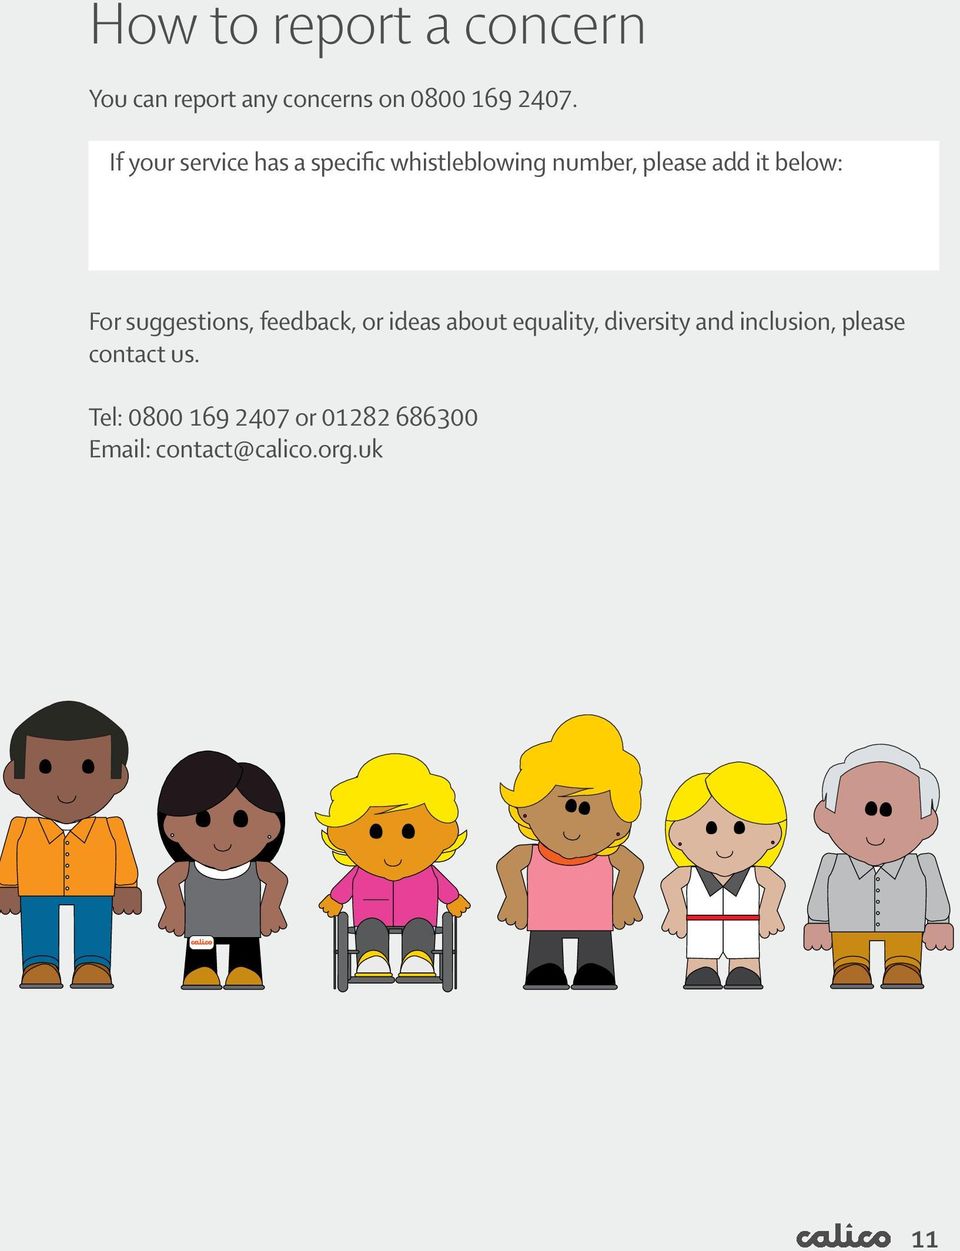 For suggestions, feedback, or ideas about equality, diversity and inclusion,